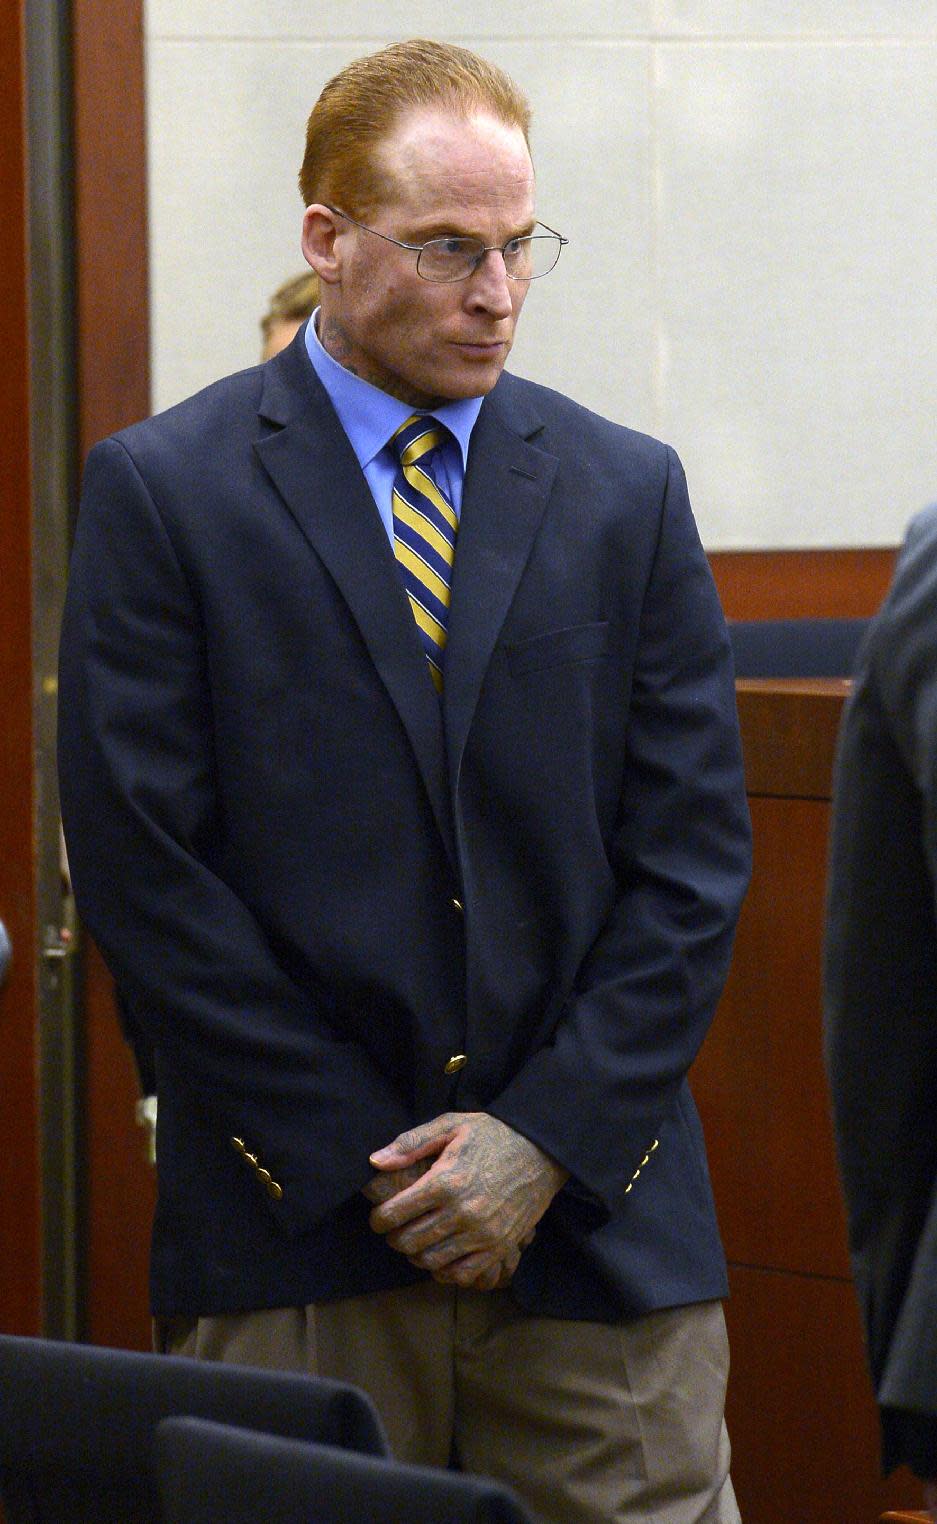 Eric Millerberg enters the courtroom during his trial, Wednesday, Feb. 12, 2014, in Ogden, Utah. Millerberg has been charged with injecting his 16-year-old baby sitter, Alexis Rasmussen, with a fatal dose of heroin and methamphetamine, then taking his wife and infant daughter along to dump Rasmussen's body near a river. (AP Photo/The Salt Lake Tribune, Leah Hogsten, Pool)